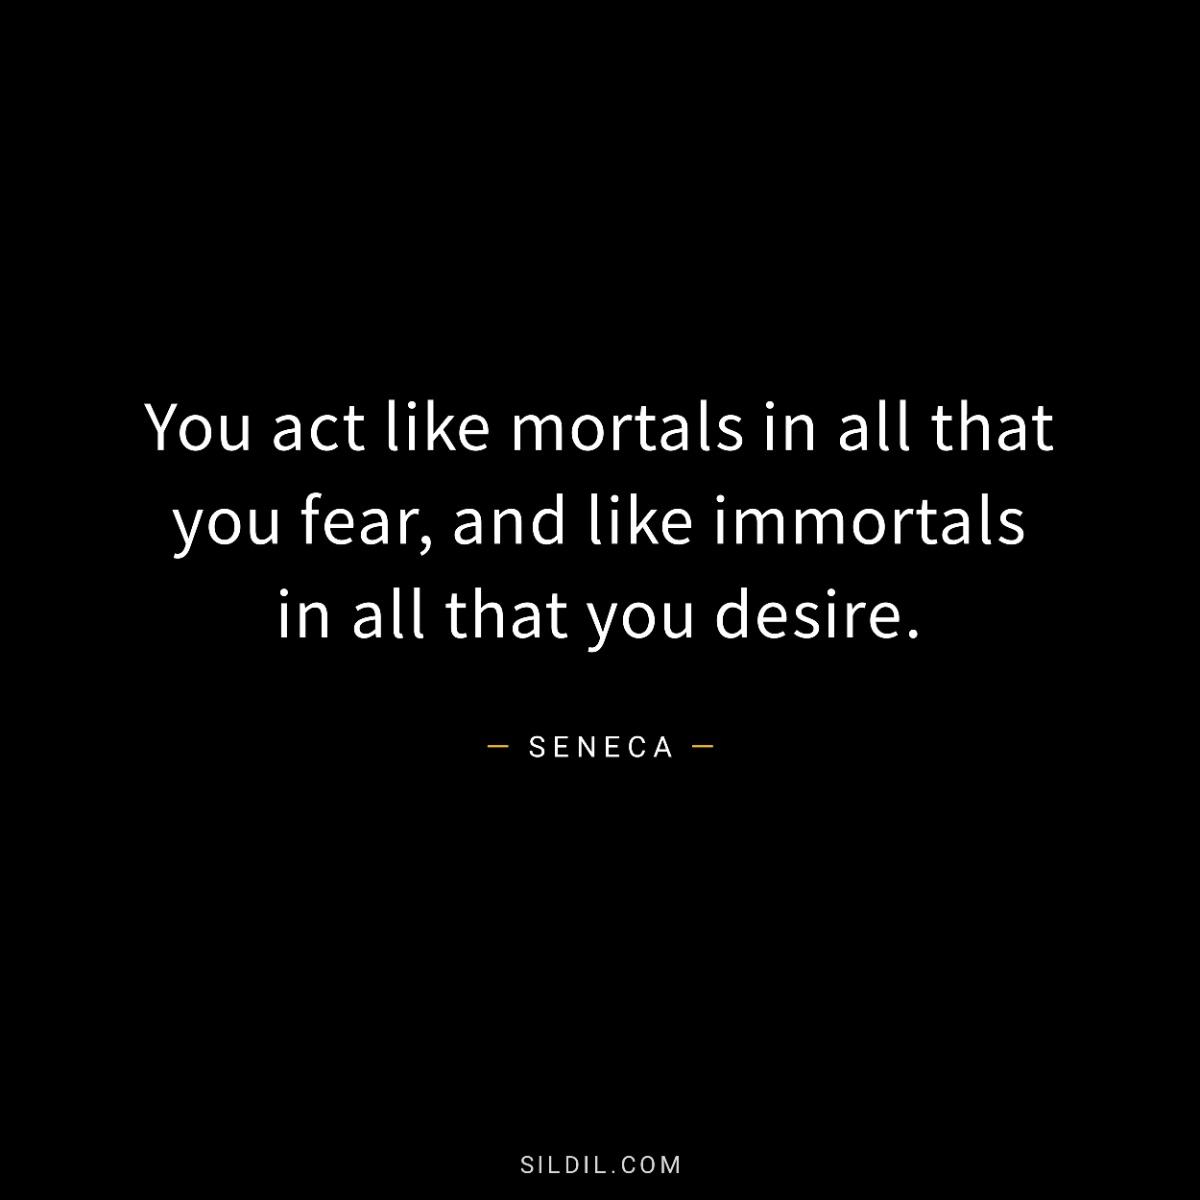 You act like mortals in all that you fear, and like immortals in all that you desire.